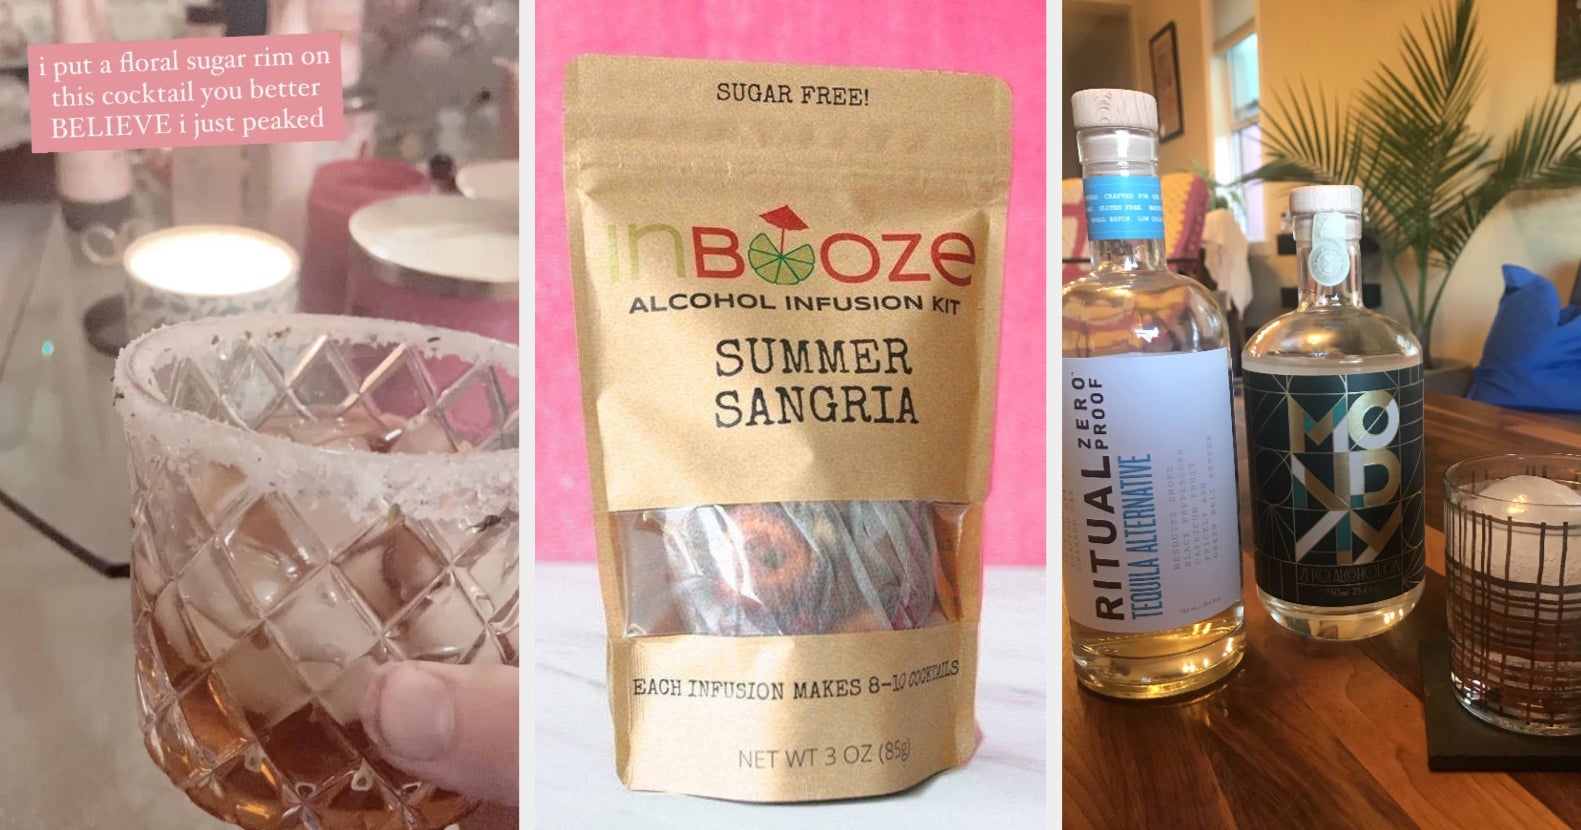 17 Things That'll Help You Make Delicious Summertime Cocktails